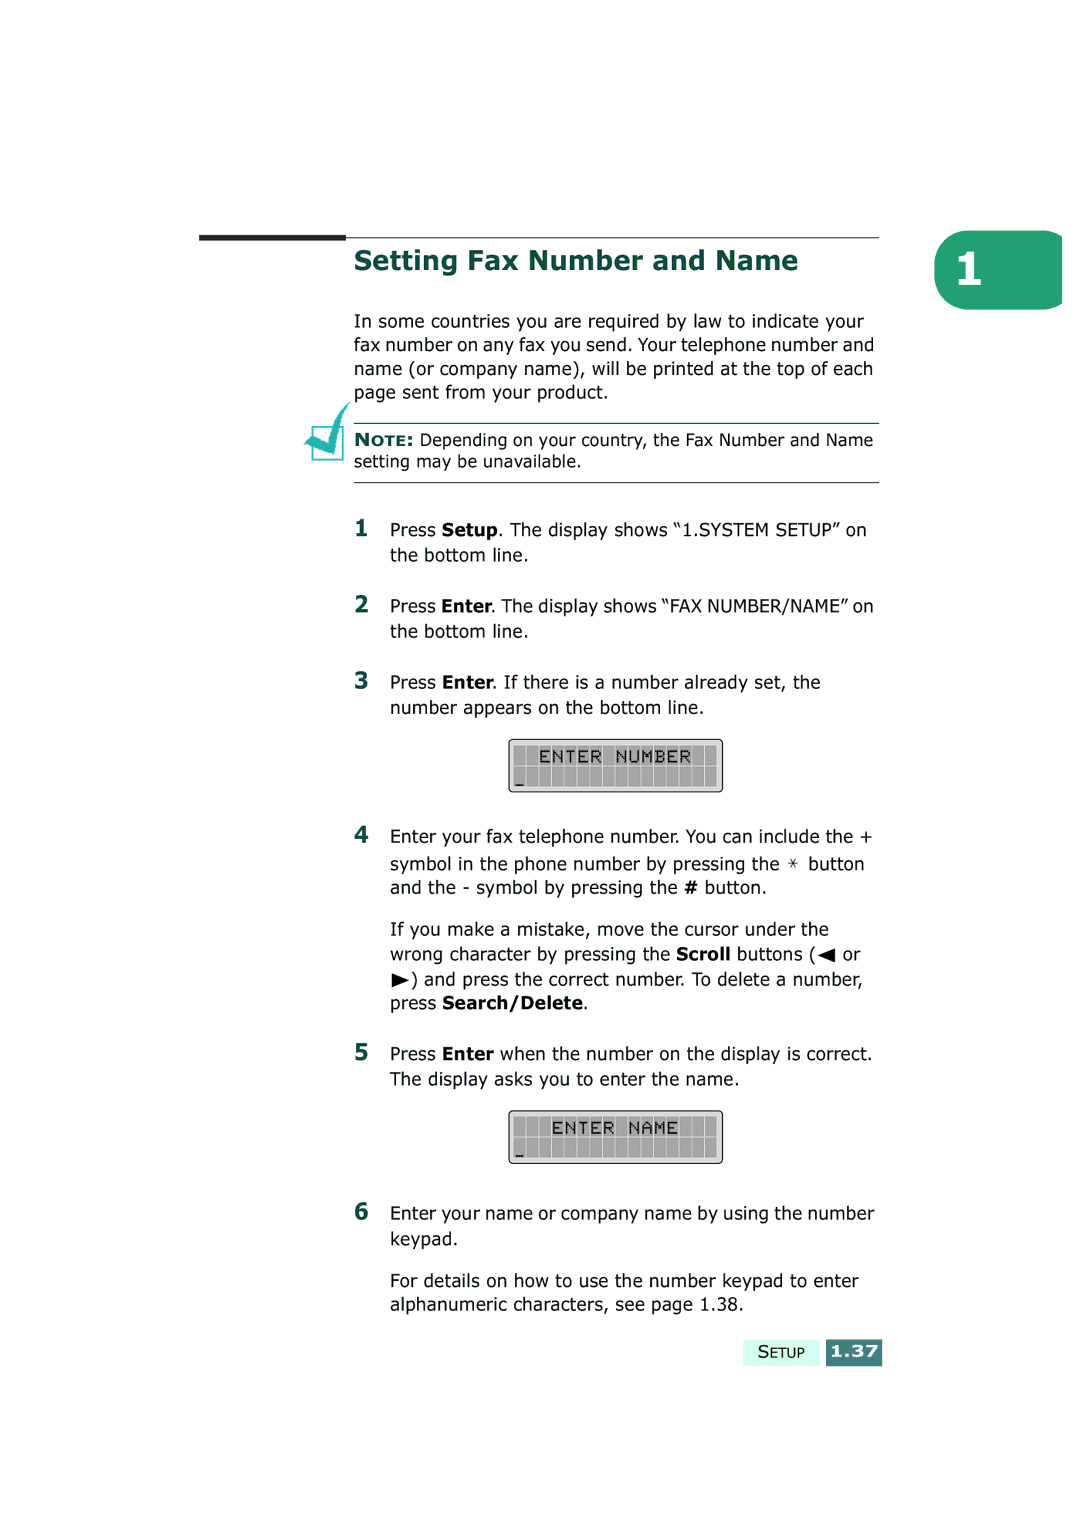 Samsung SF-430 manual Setting Fax Number and Name 